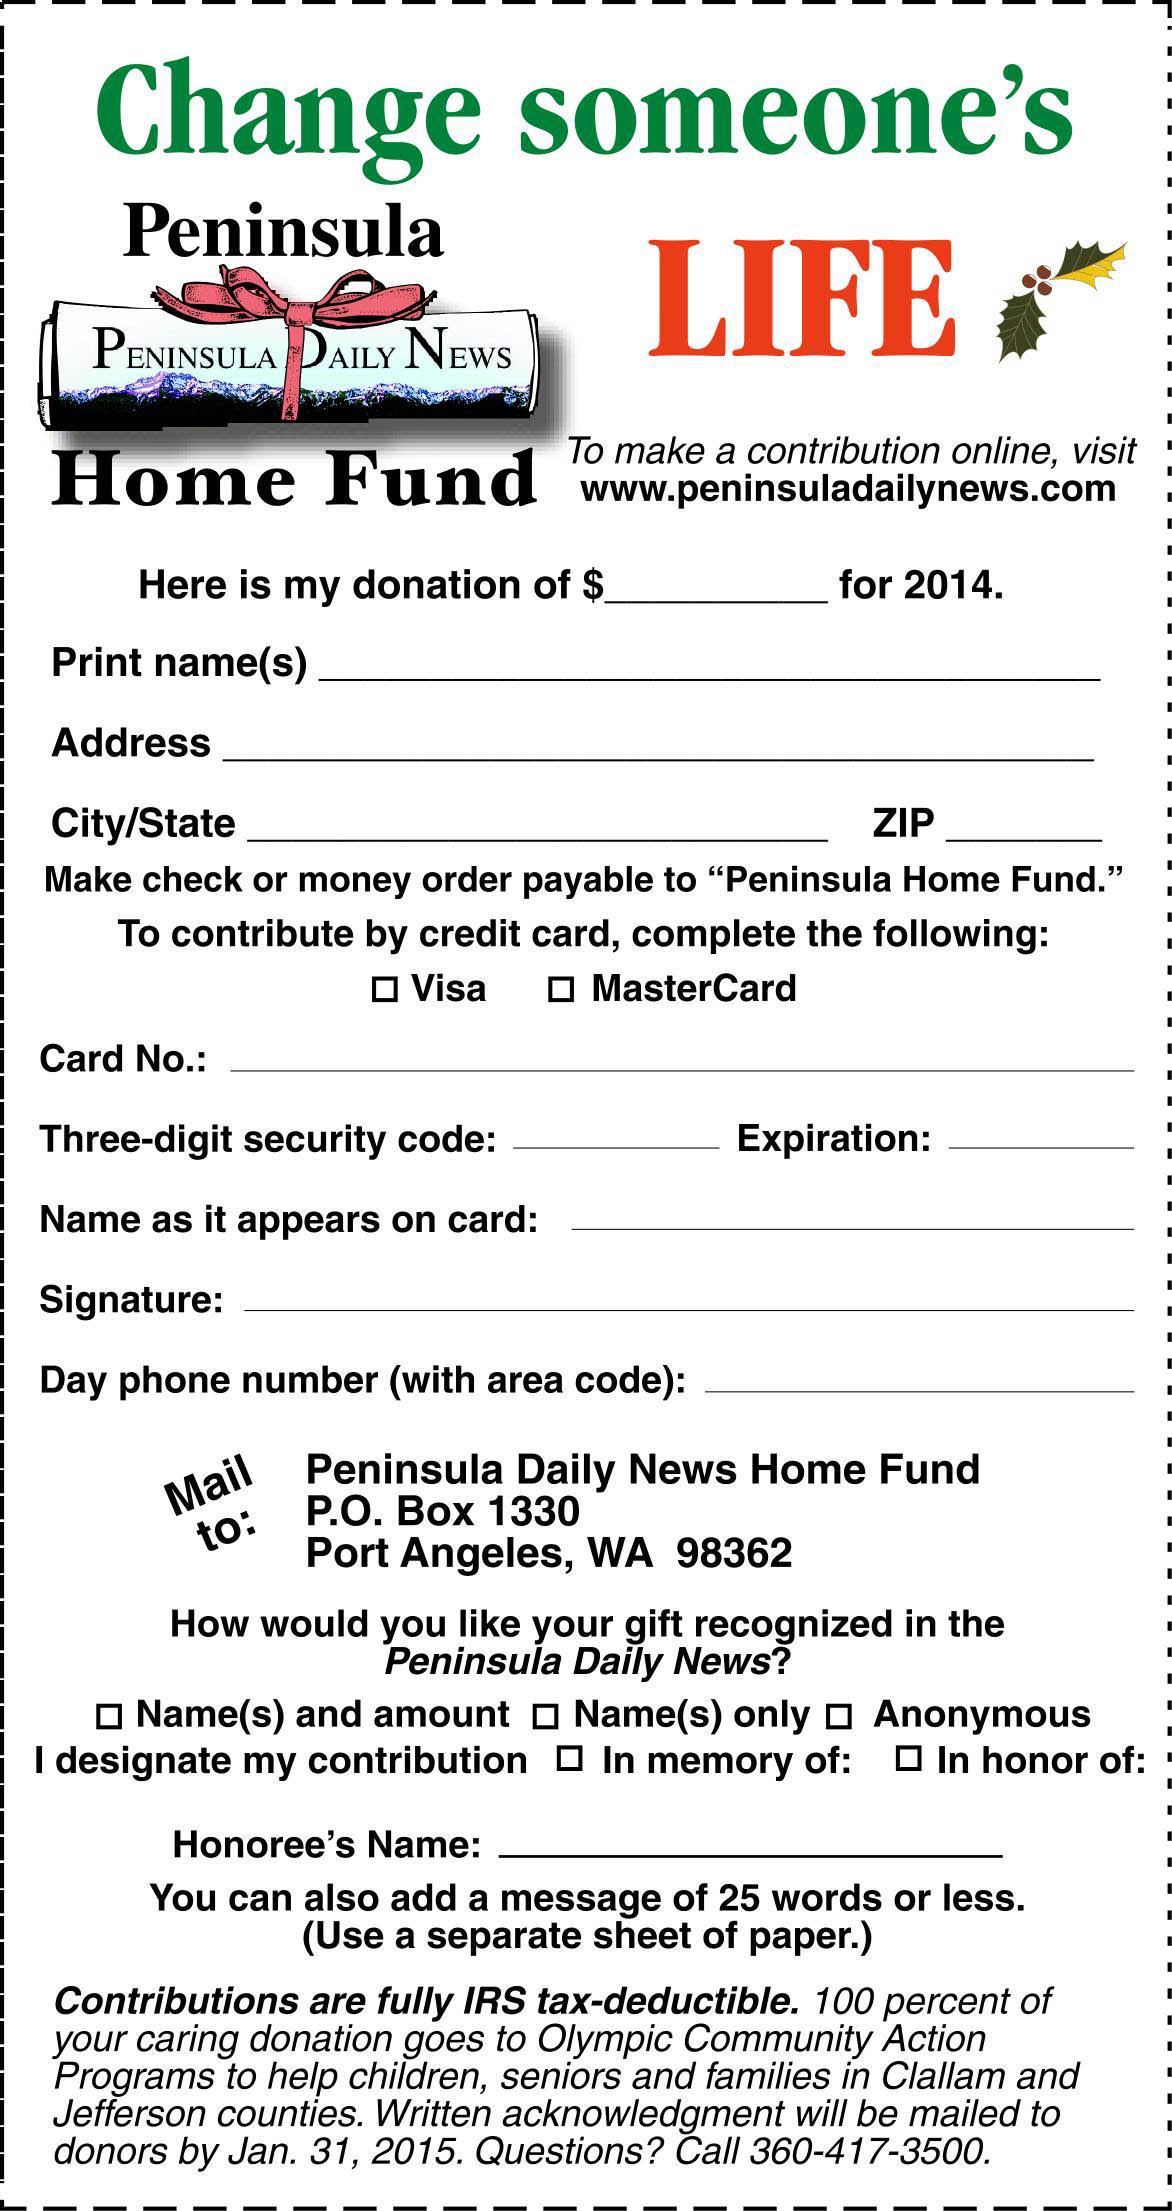 You can donate to the Peninsula Home Fund by using this coupon. Or you can donate online at https://secure.peninsuladailynews.com/homefund